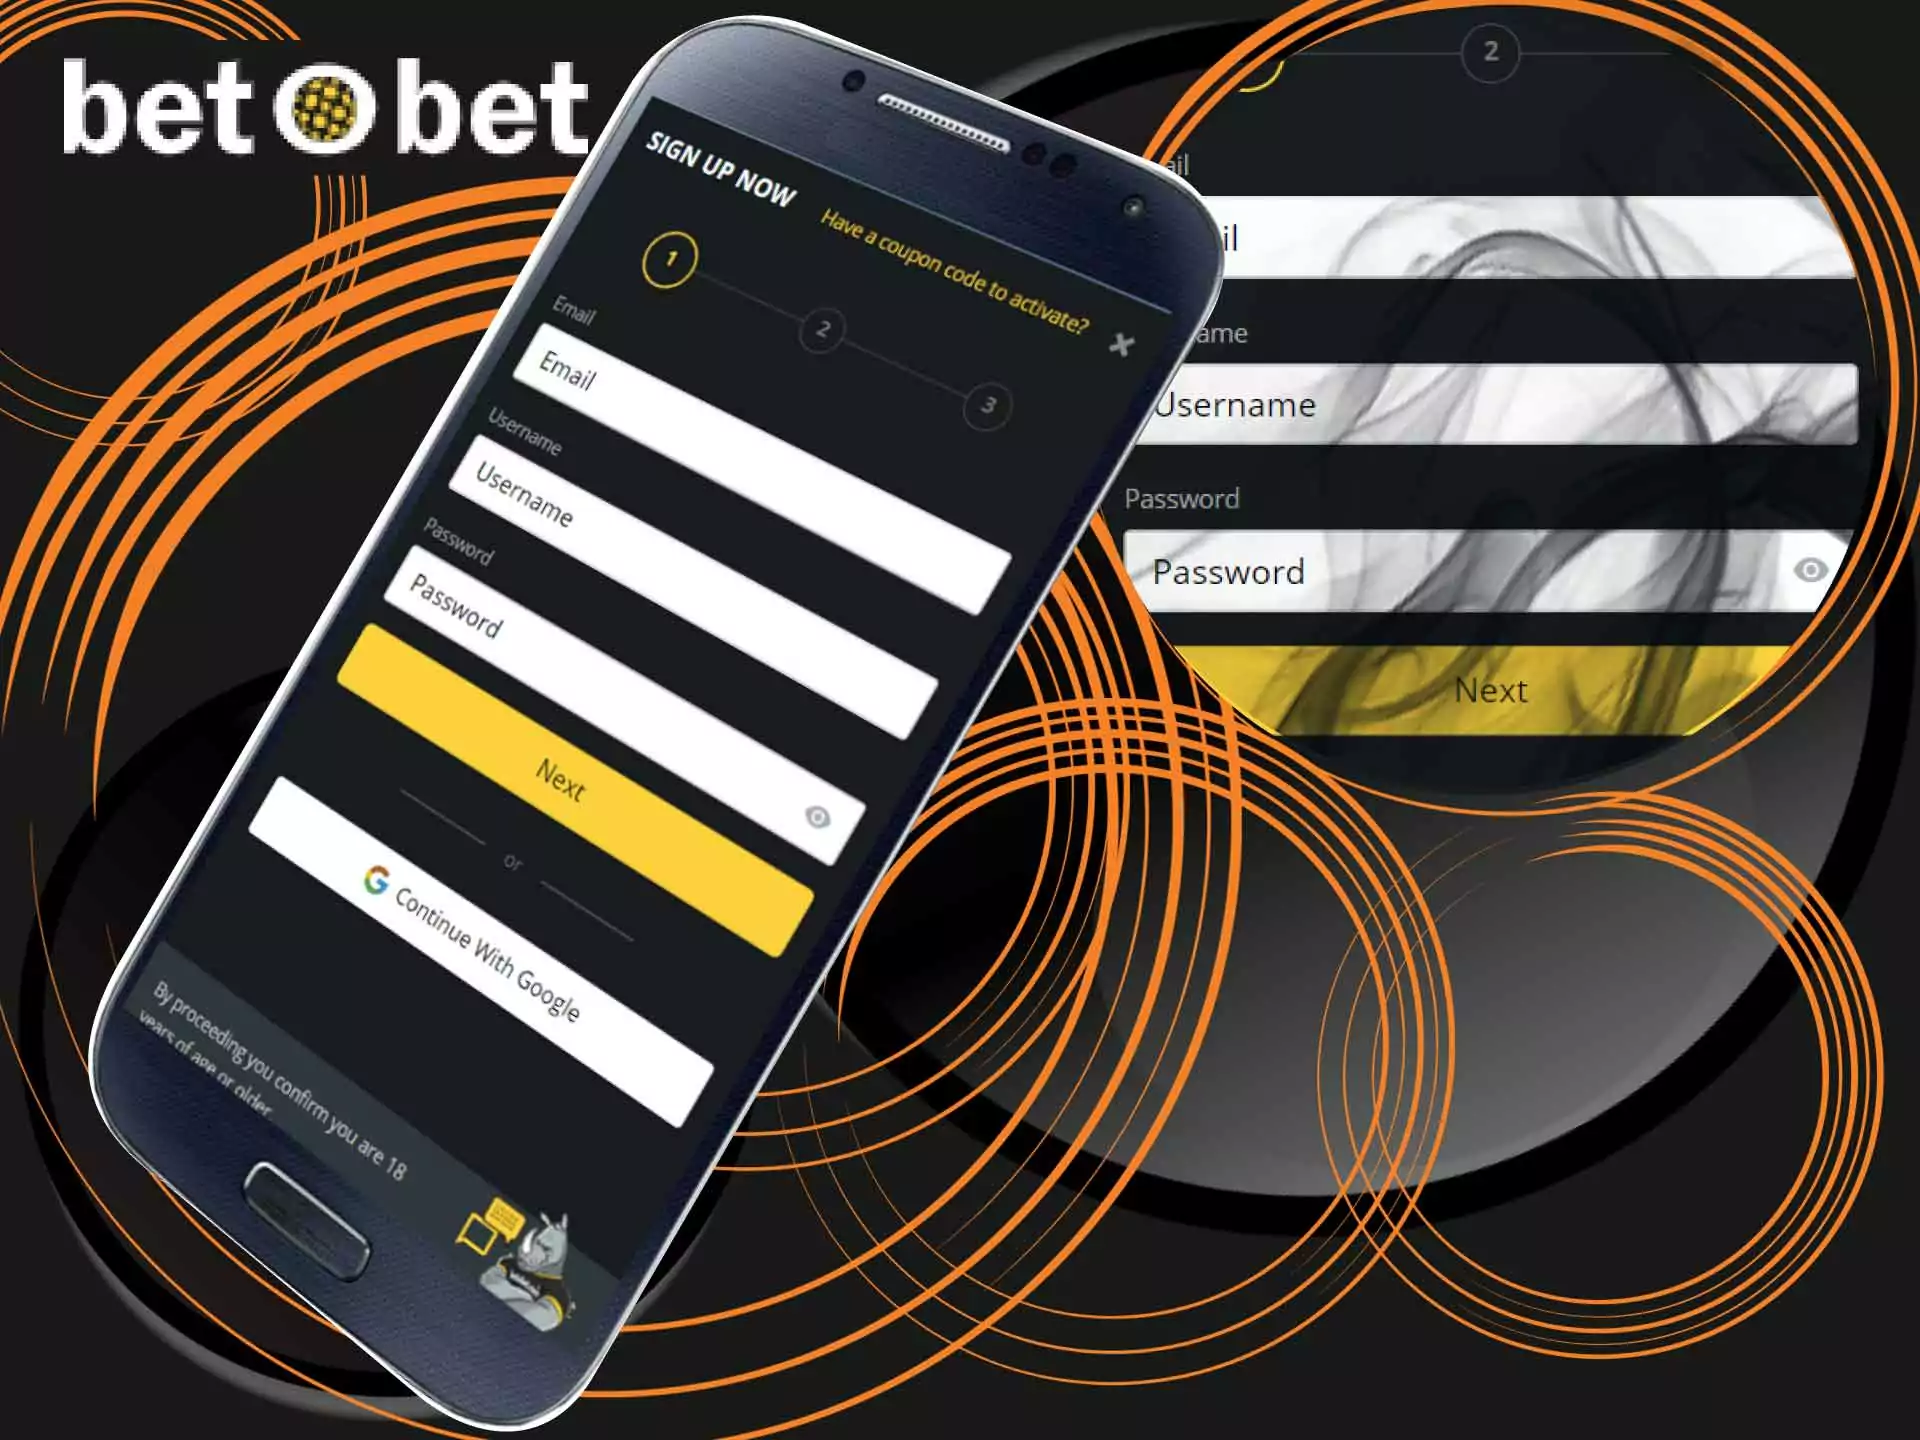 Sign up for BetOBet.